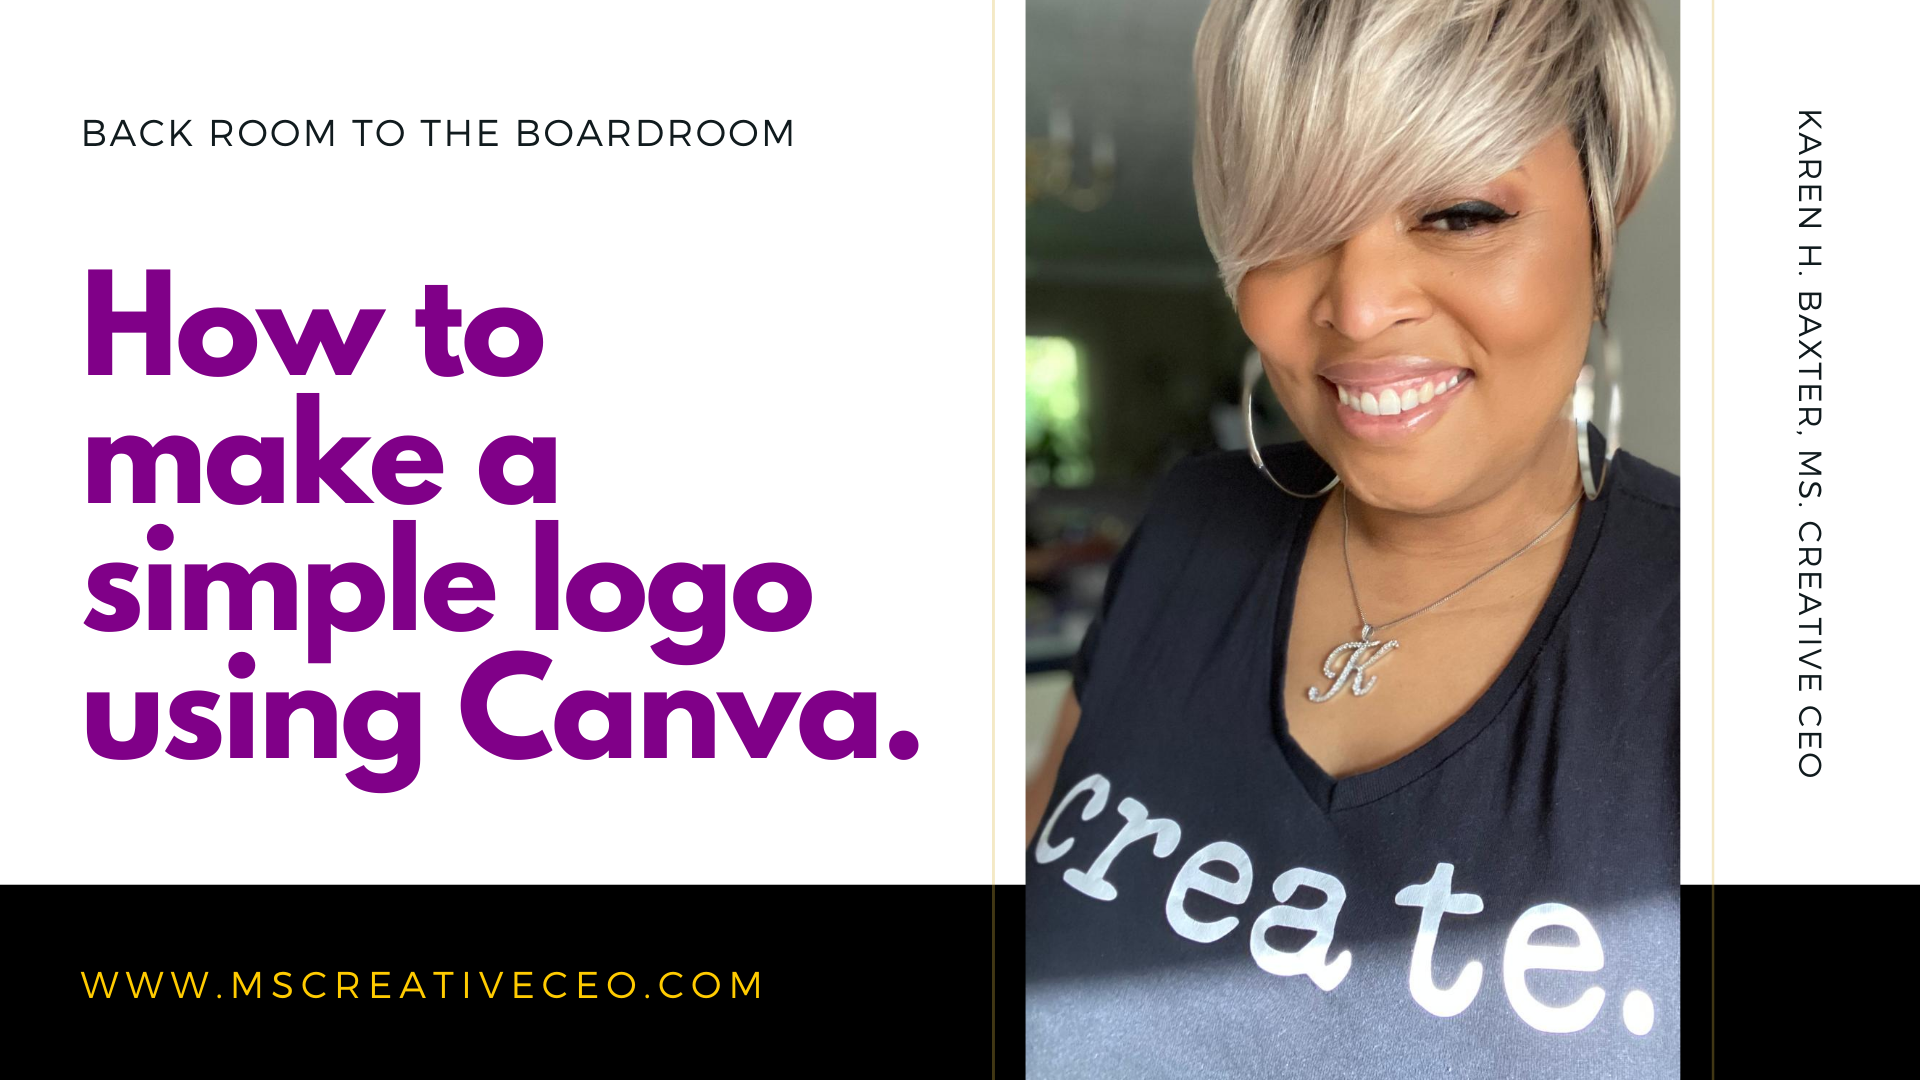 HOW TO MAKE A SIMPLE LOGO IN CANVA